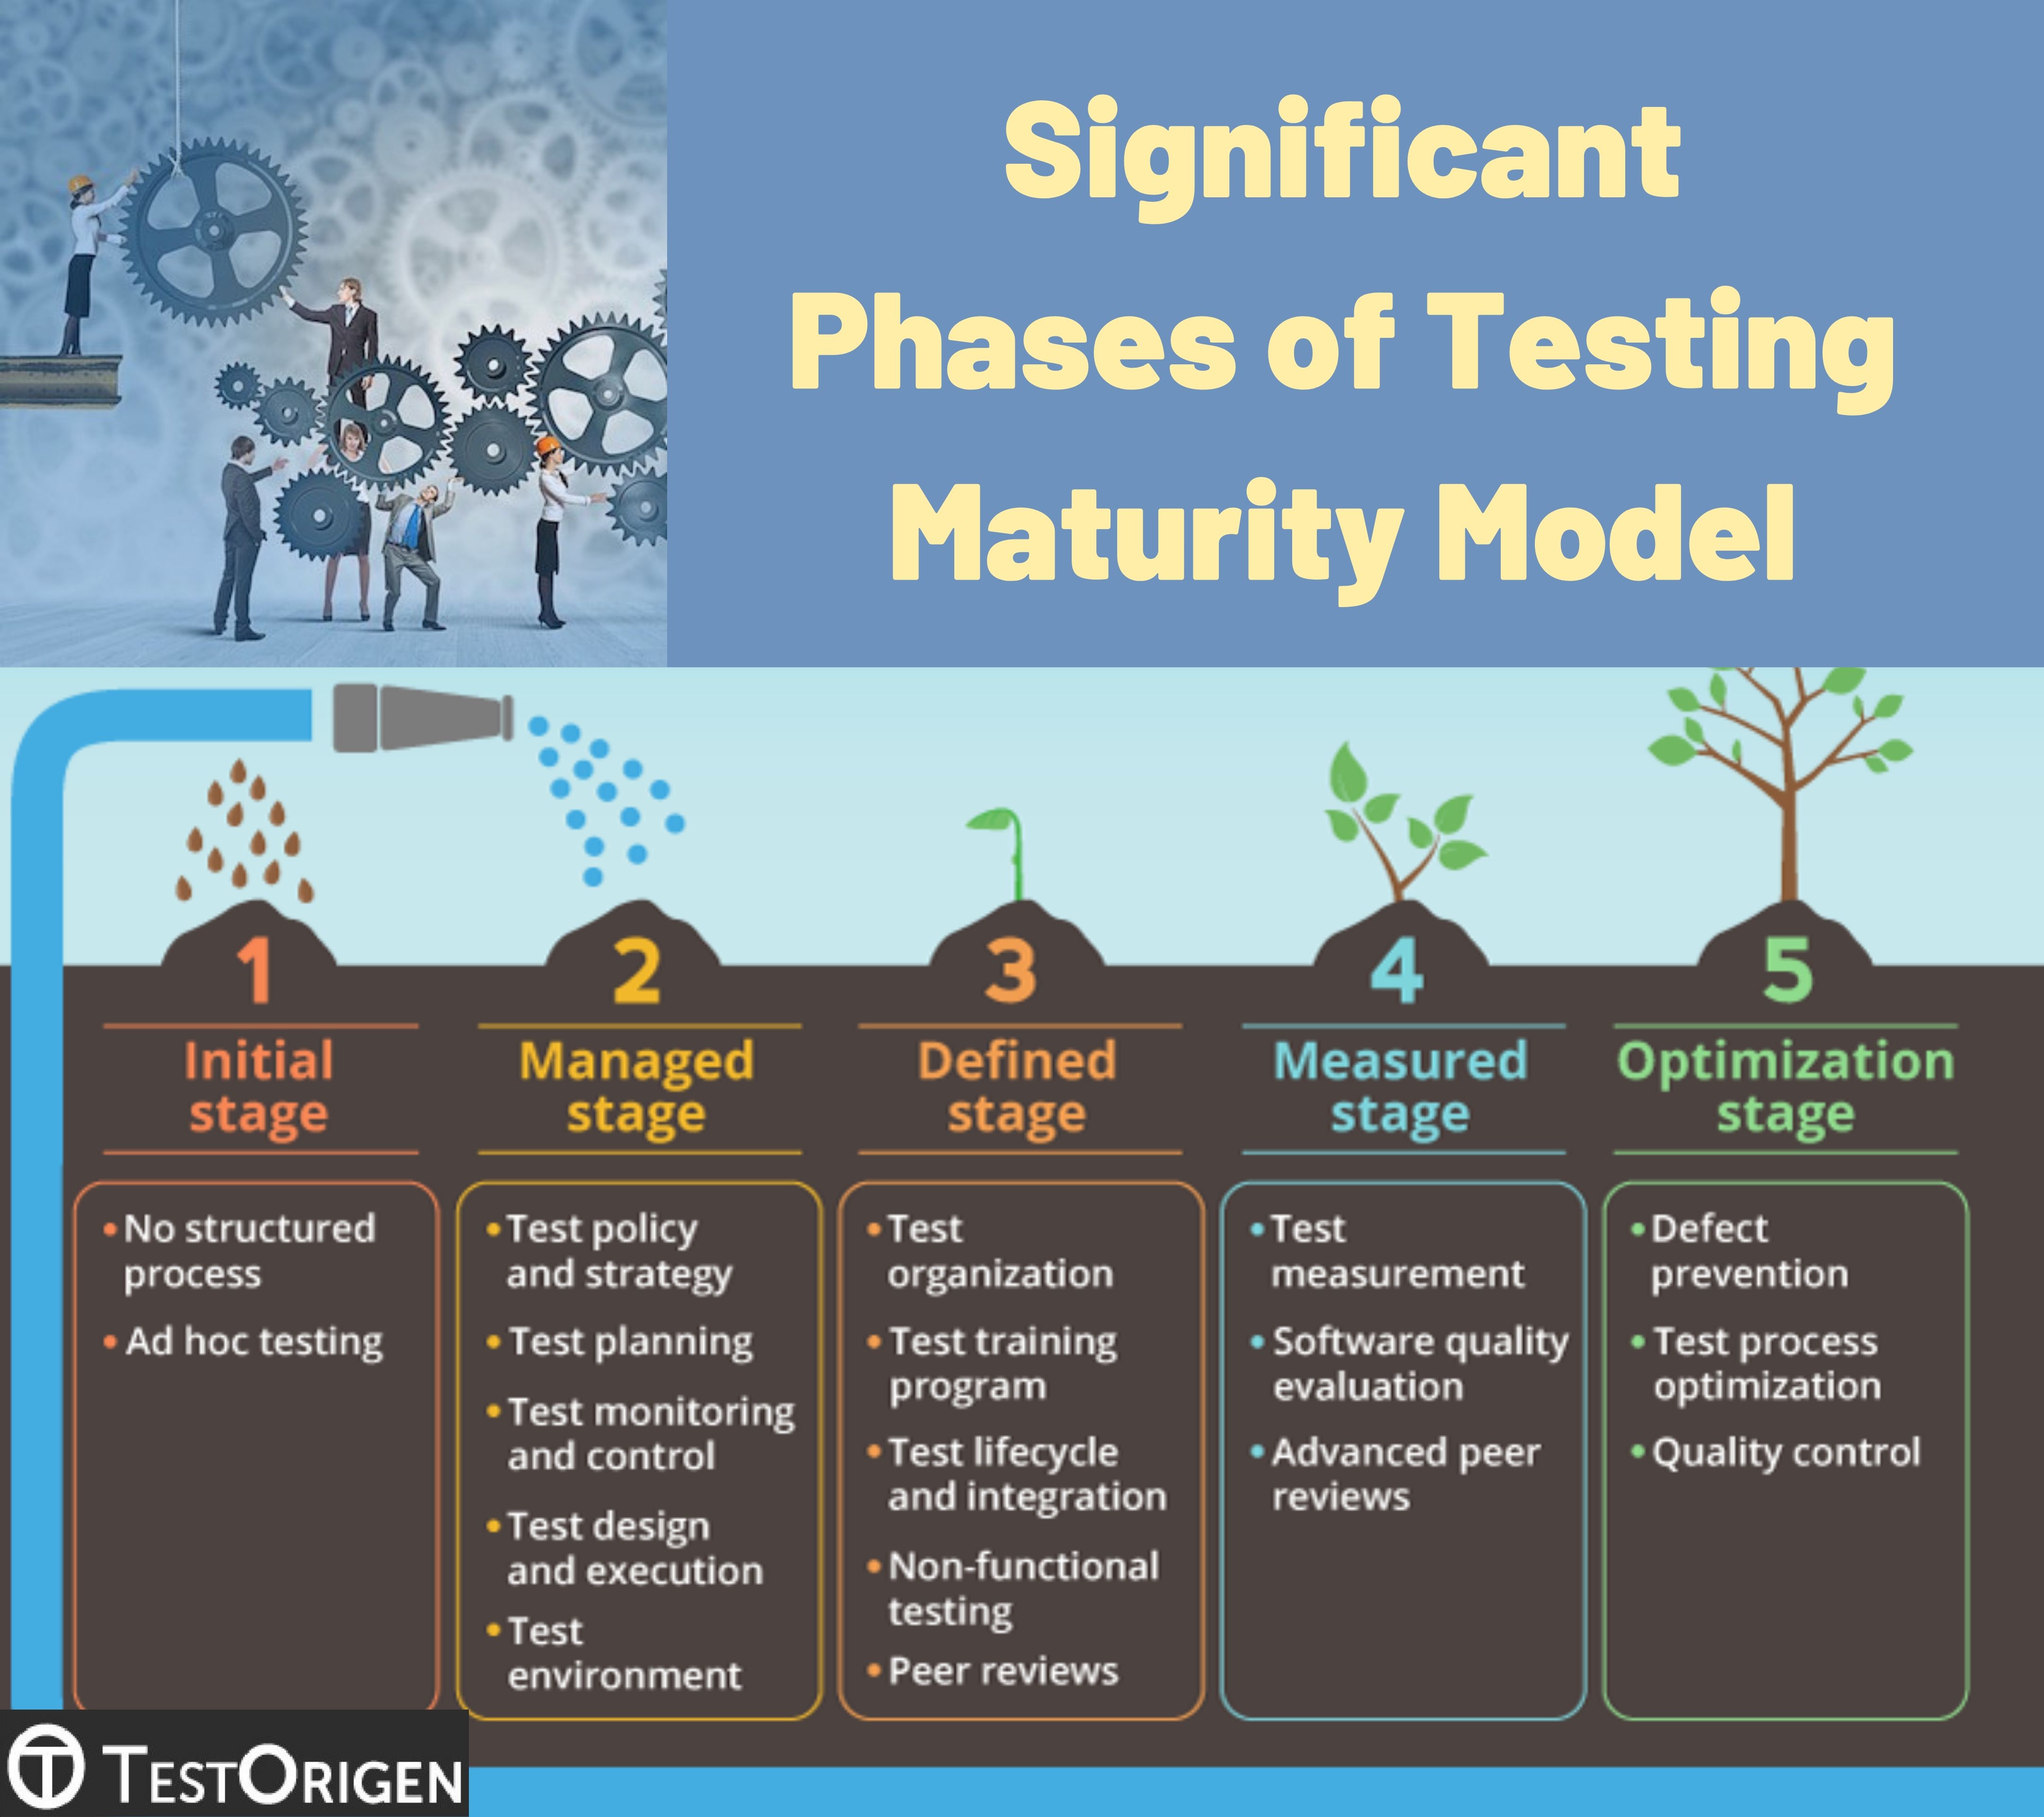 Significant Phases of Testing Maturity Model